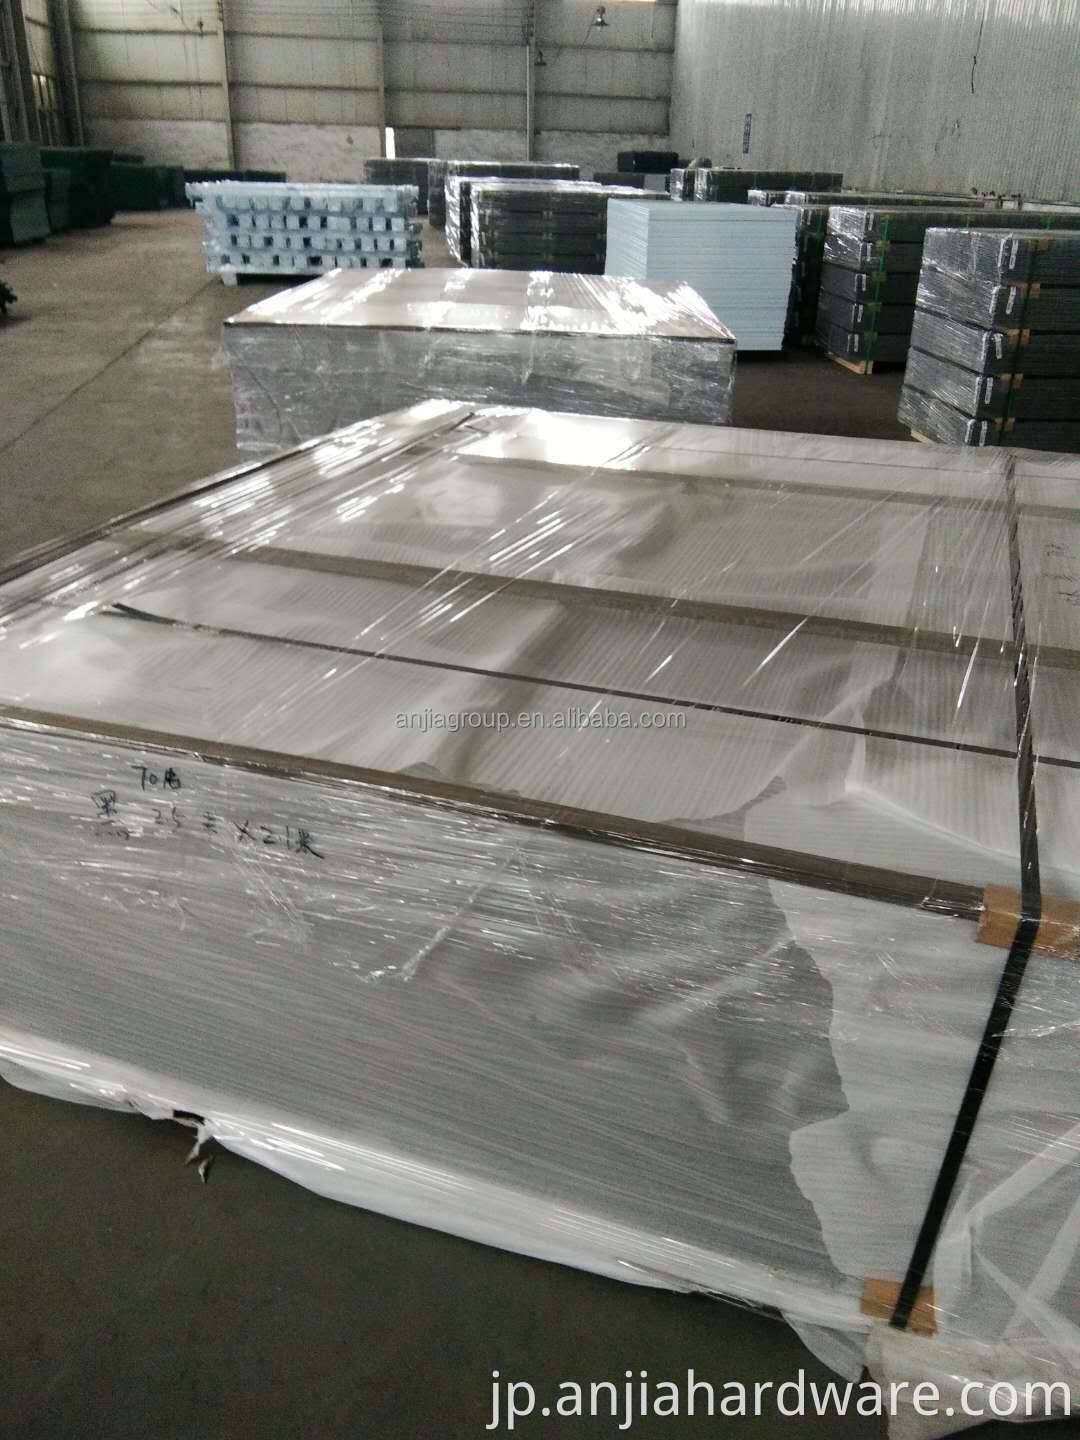 pallet package of fence